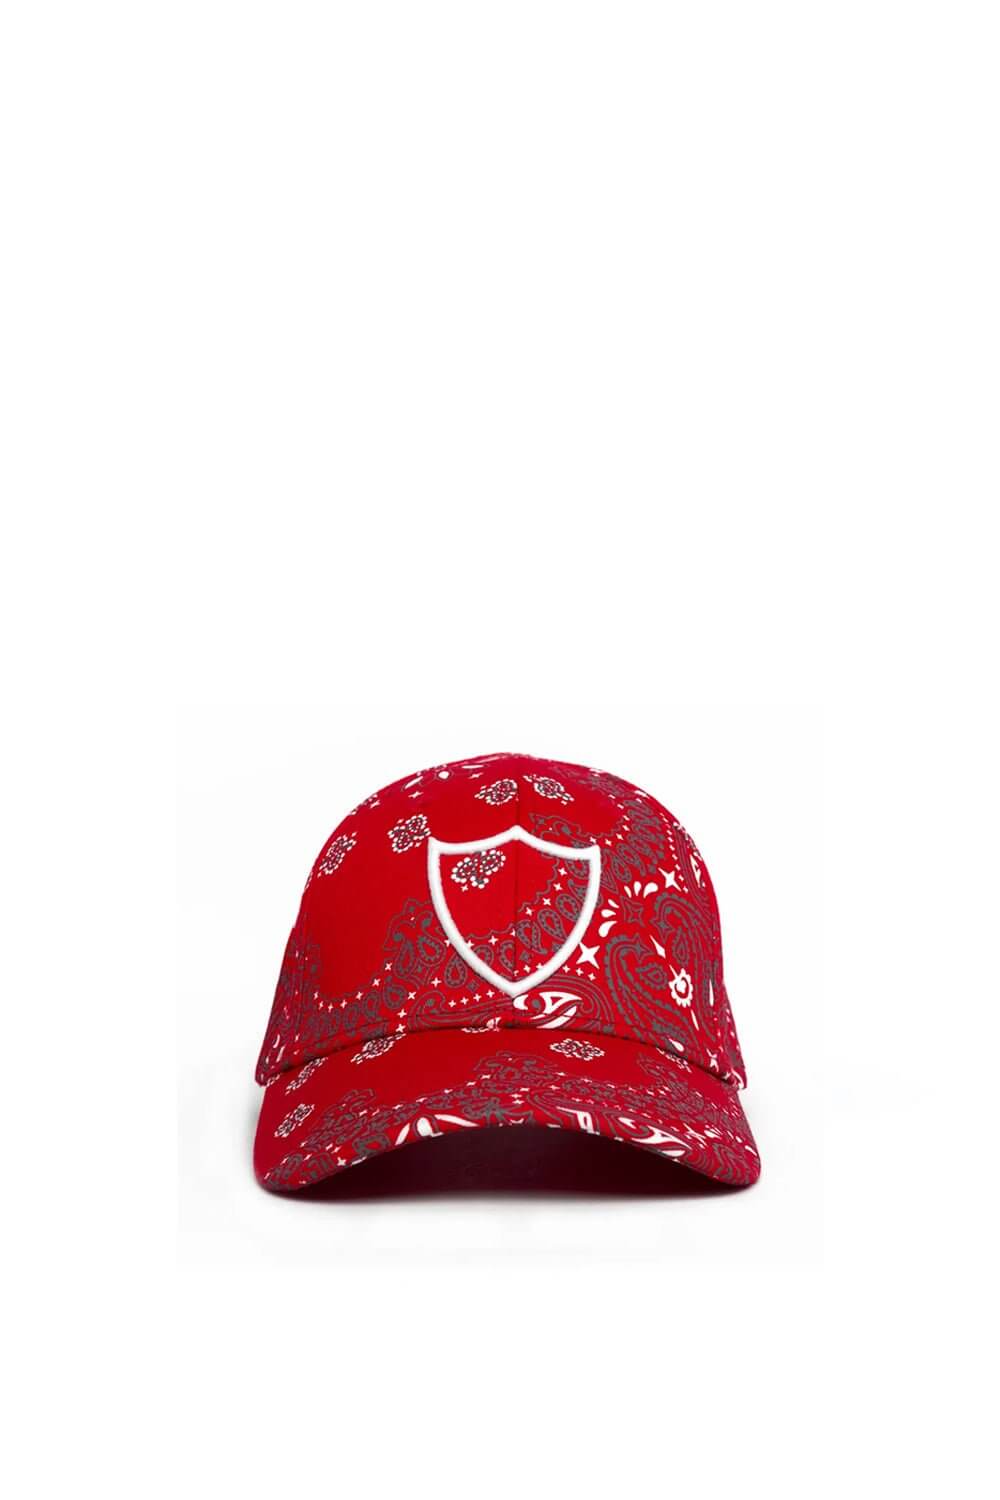 HTC BANDANA VISOR CAP Paisley baseball hat, HTC logo embroidered on the front. One Size. 100% Cotton. HTC LOS ANGELES